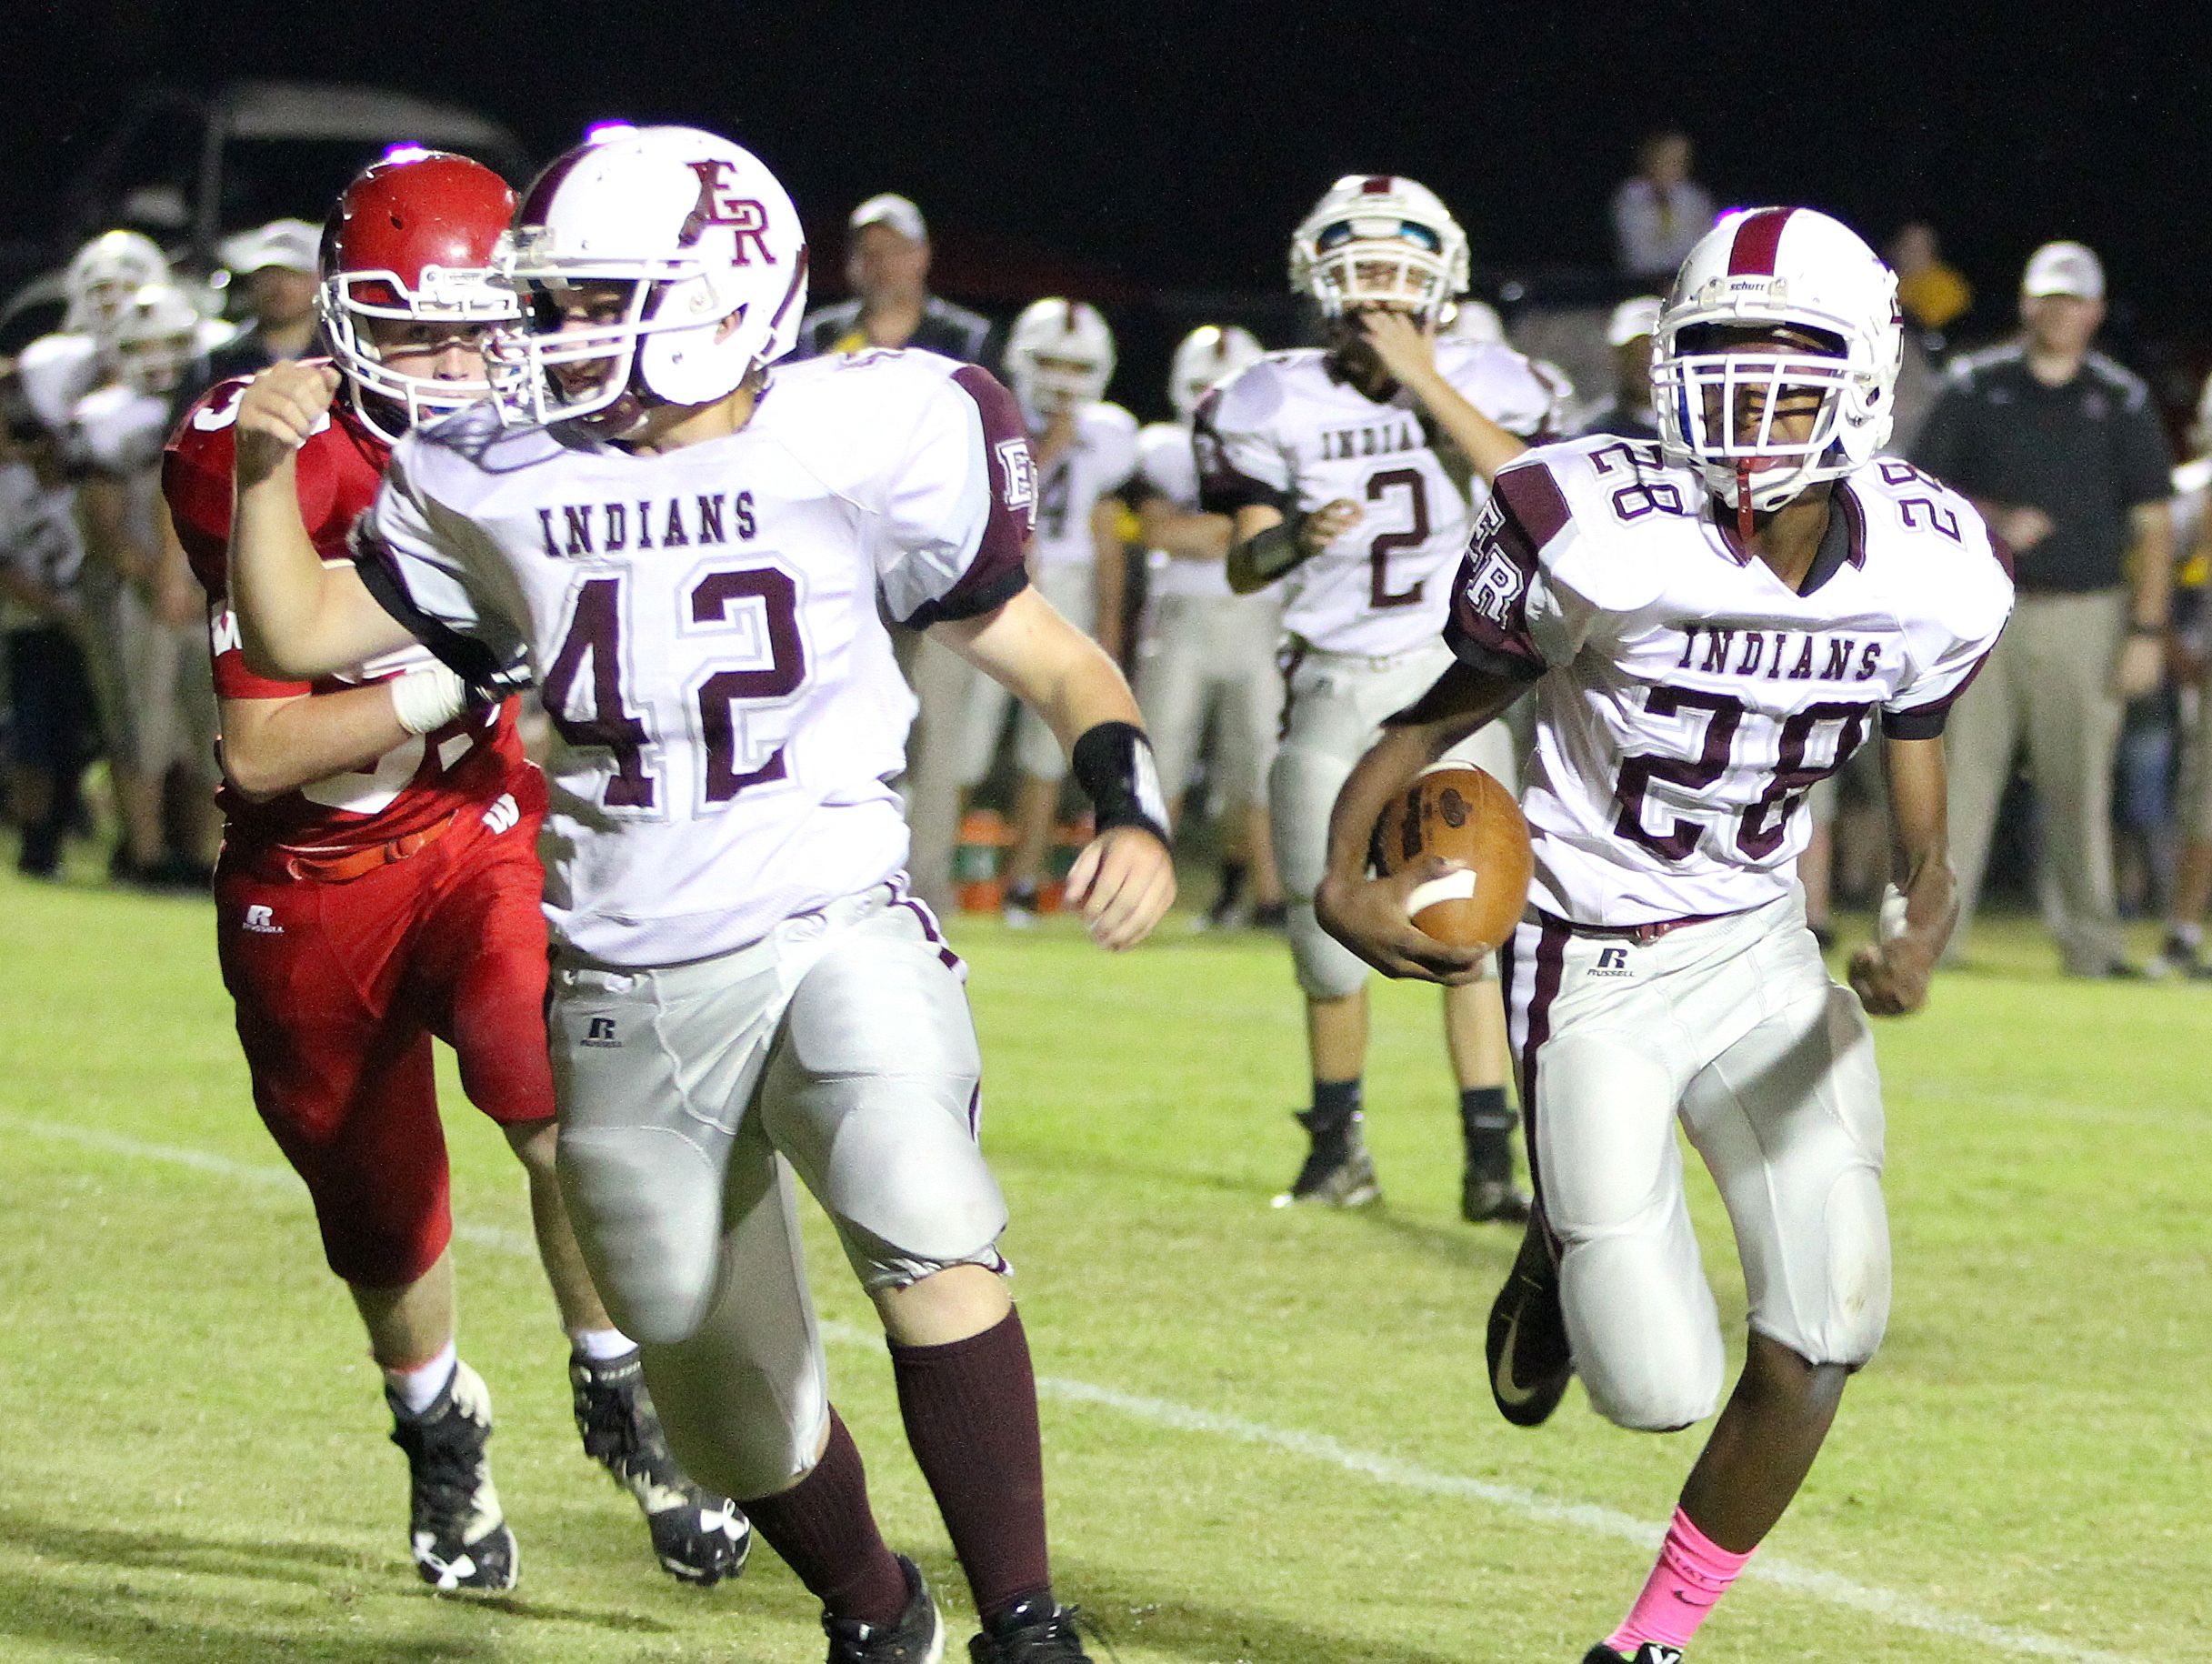 Taylor Groves scored three touchdowns in East Robertson's 30-16 win over Westmoreland.